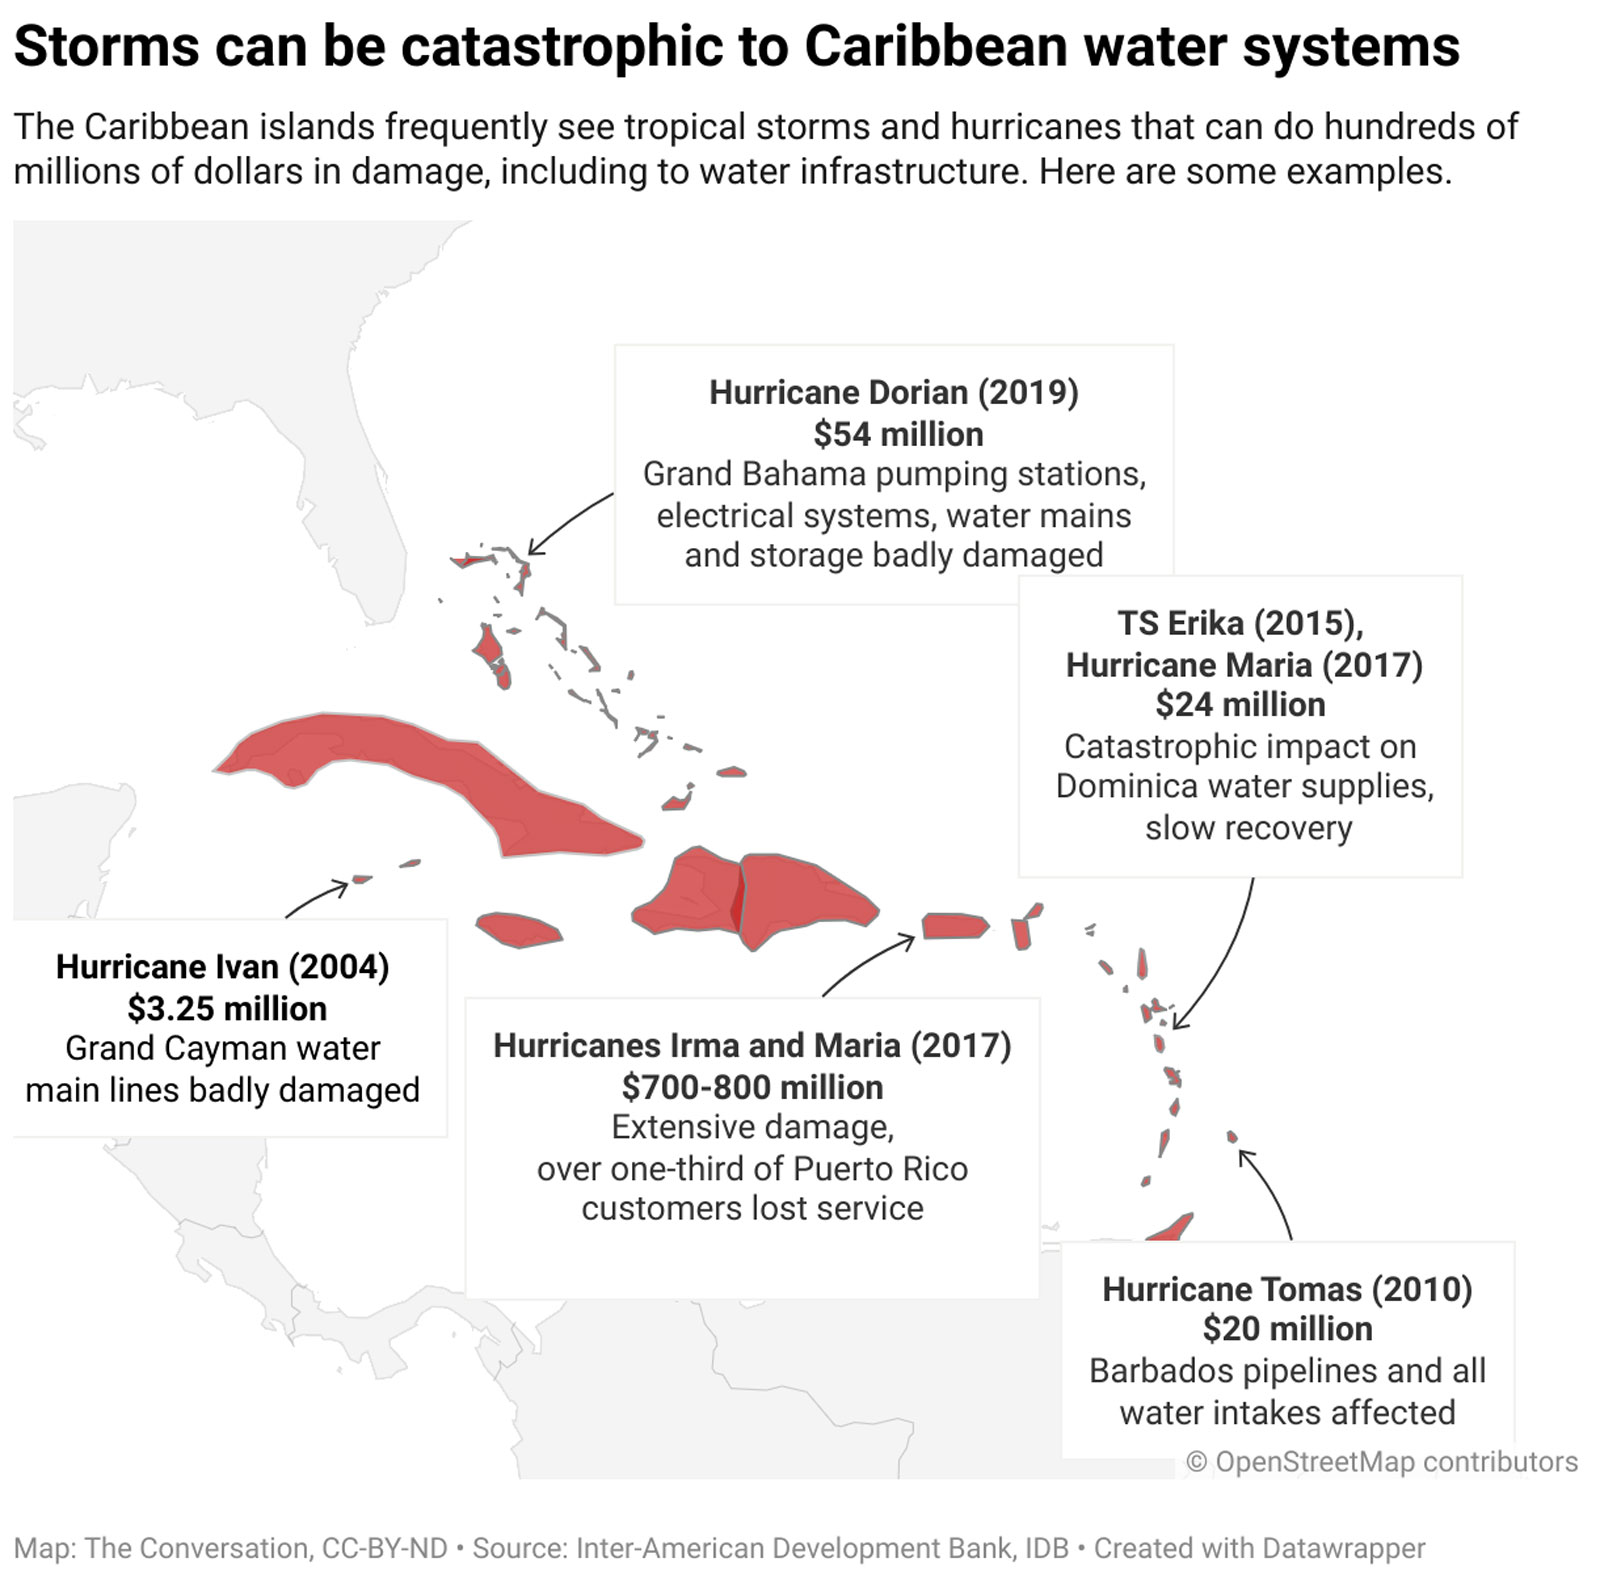 Chart/Map: Storms can be catastrophic to Caribbean water systems - The Caribbean islands frequently see tropical storms and hurricanes that can do hundreds of millions of dollars in damage, including to water infrastructure. Here are some examples.